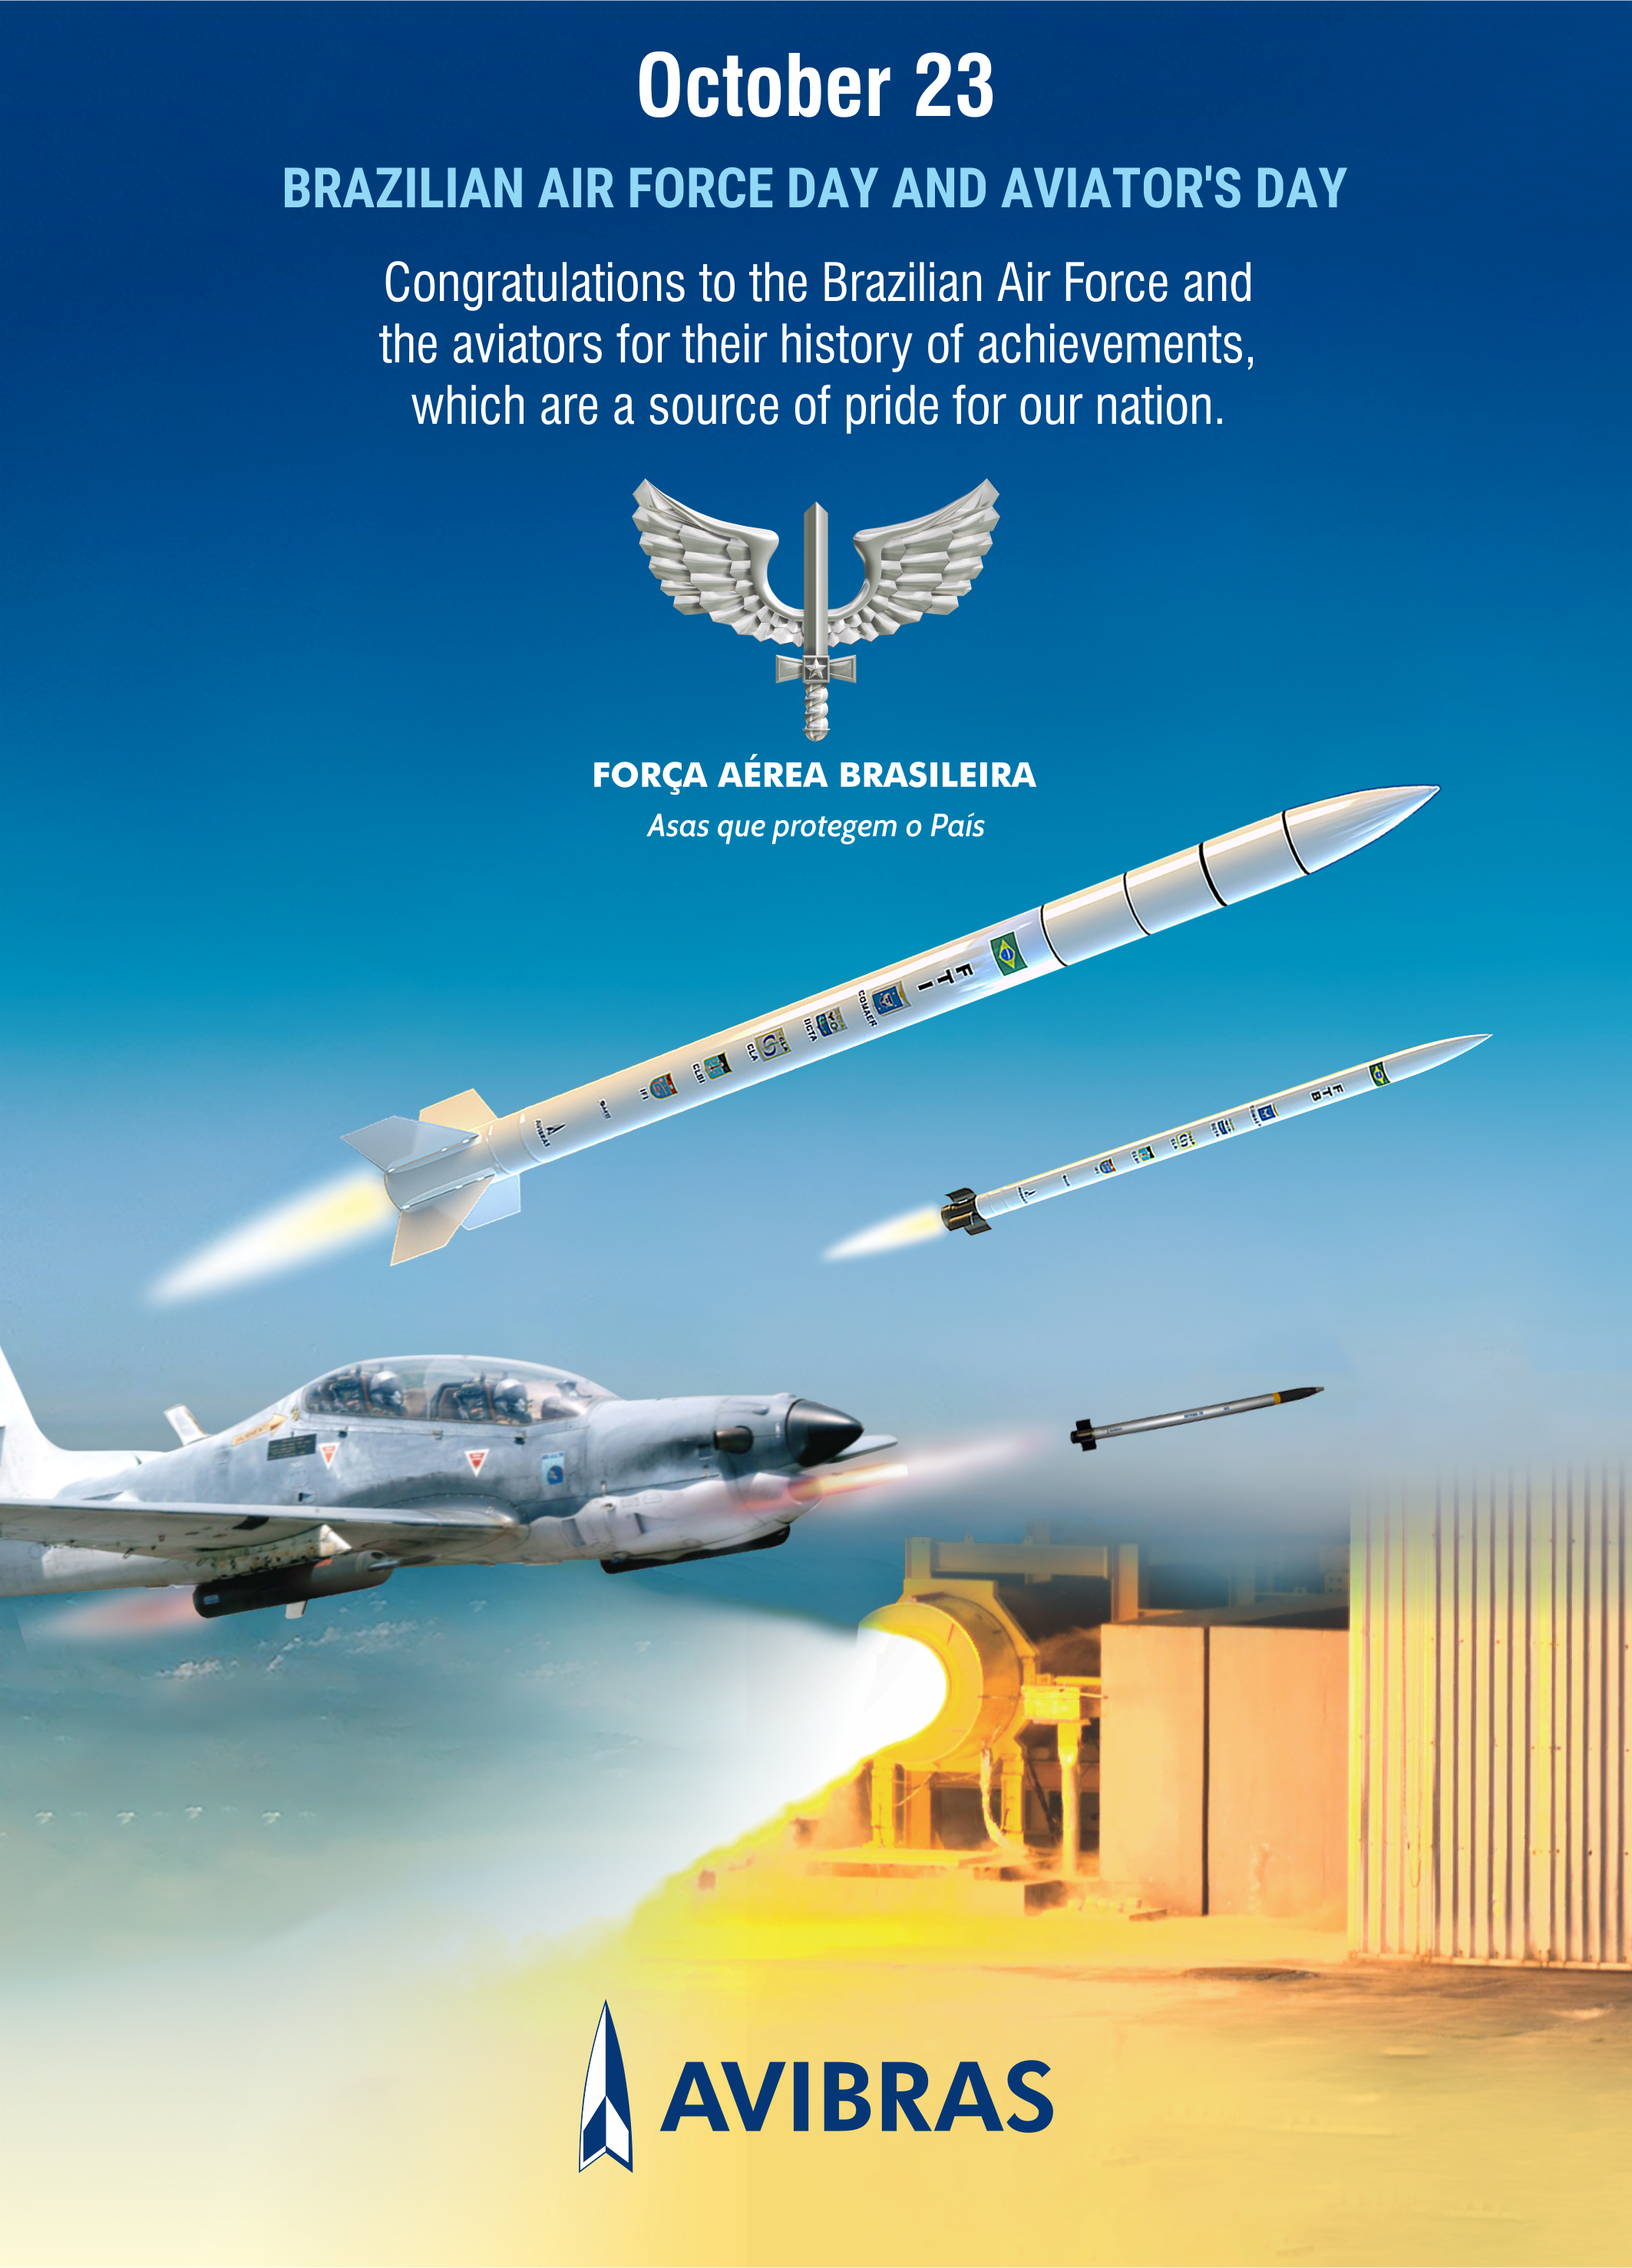 Email marketing Avibras tribute to the Brazilian Air Force